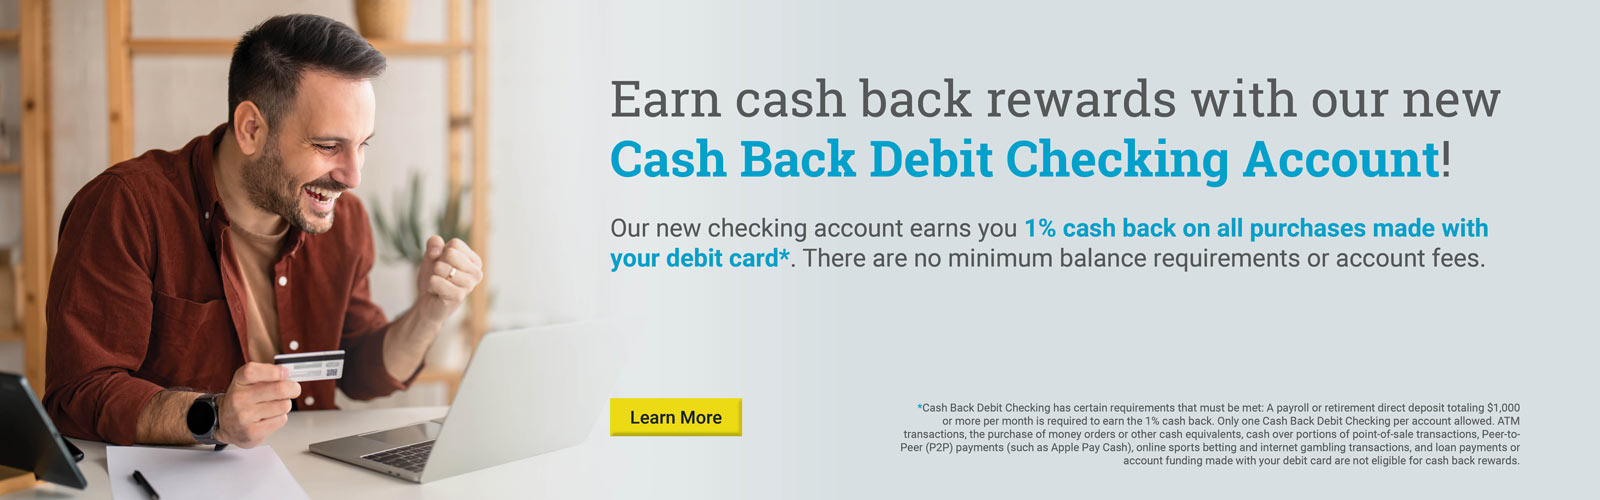 Earn cash back rewards with our new cash back debit checking account!